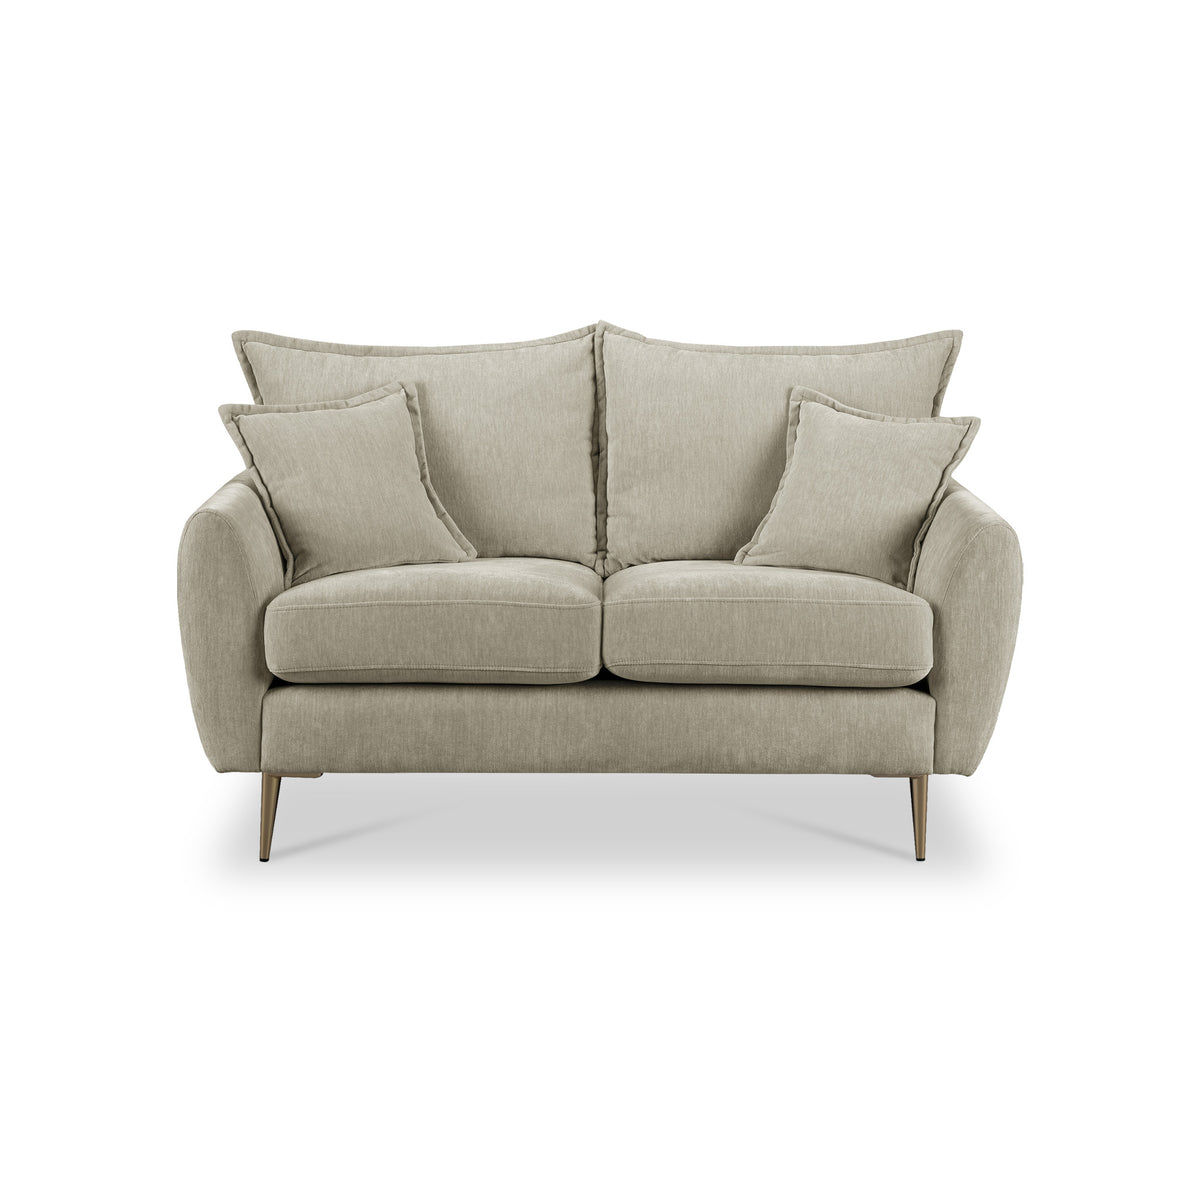 Evelyn Mink 2 Seater Sofa from Roseland Furniture